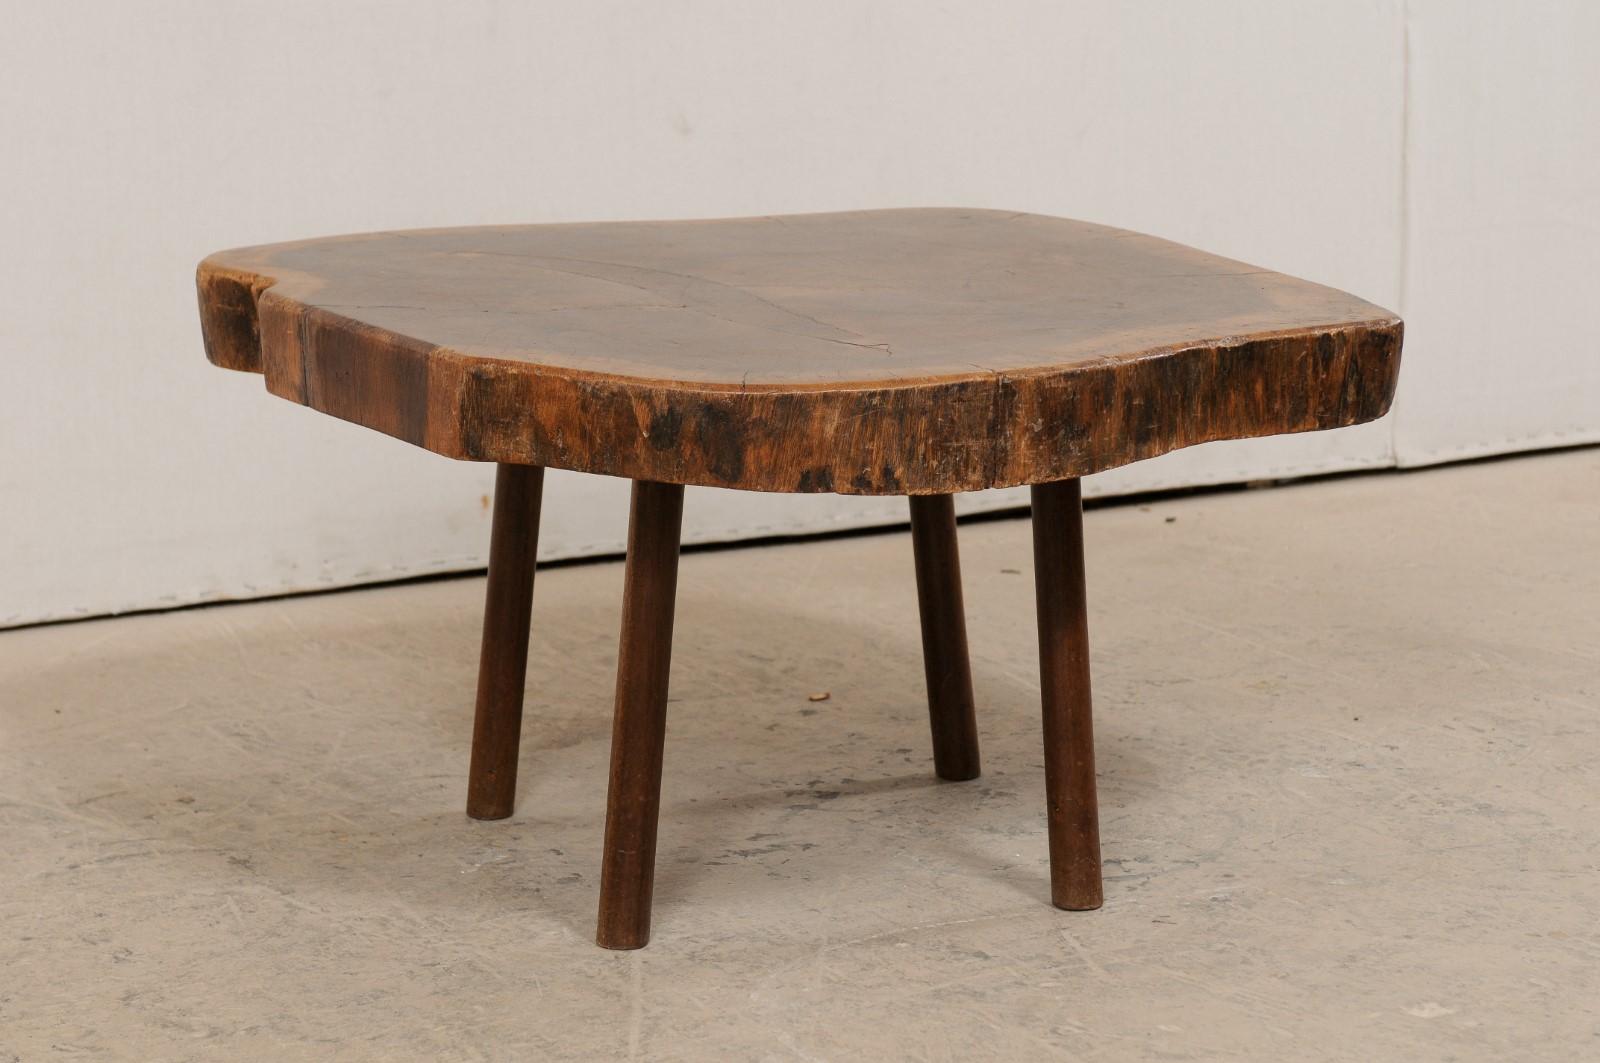 A smaller-sized European wood slab top coffee table from the early 20th century. This antique table from Europe features a natural wood slab top, with smoothed edges, which has been raised on four rounded legs. The table top displays it's